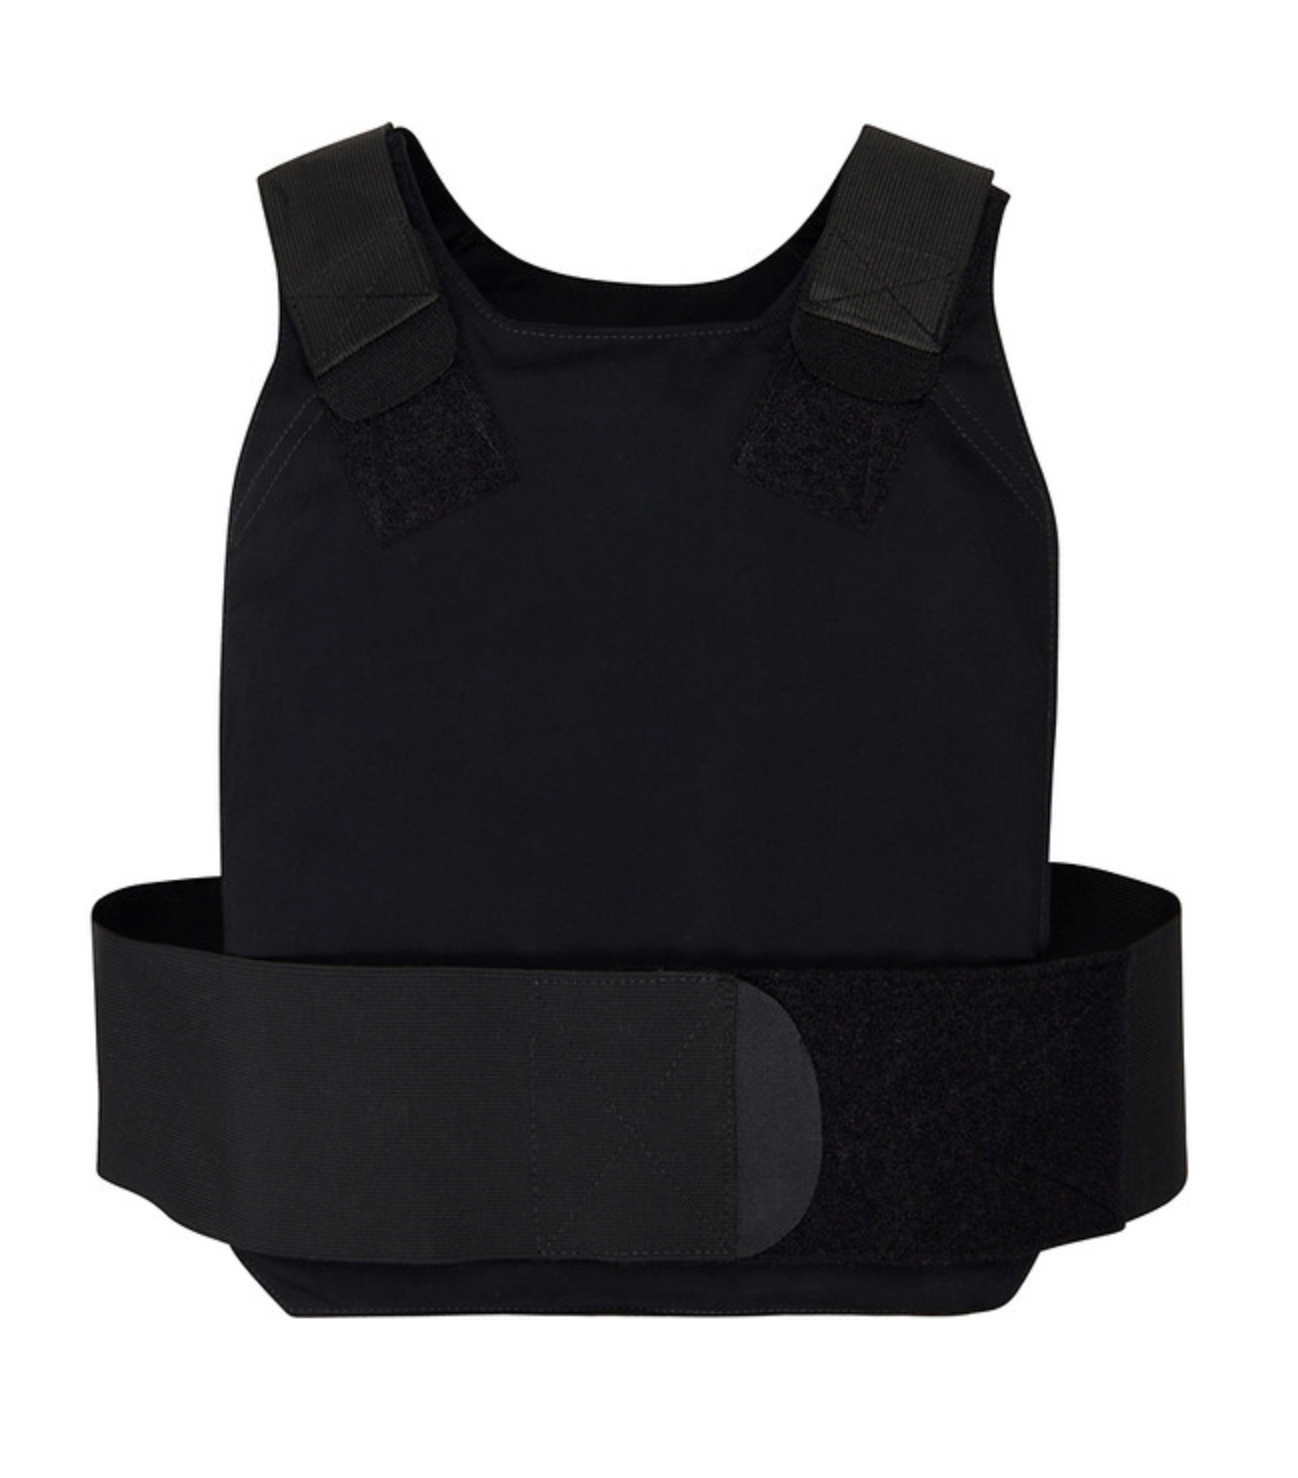 SECPRO Level IIIA Low Profile Concealable Vest – Security Pro USA